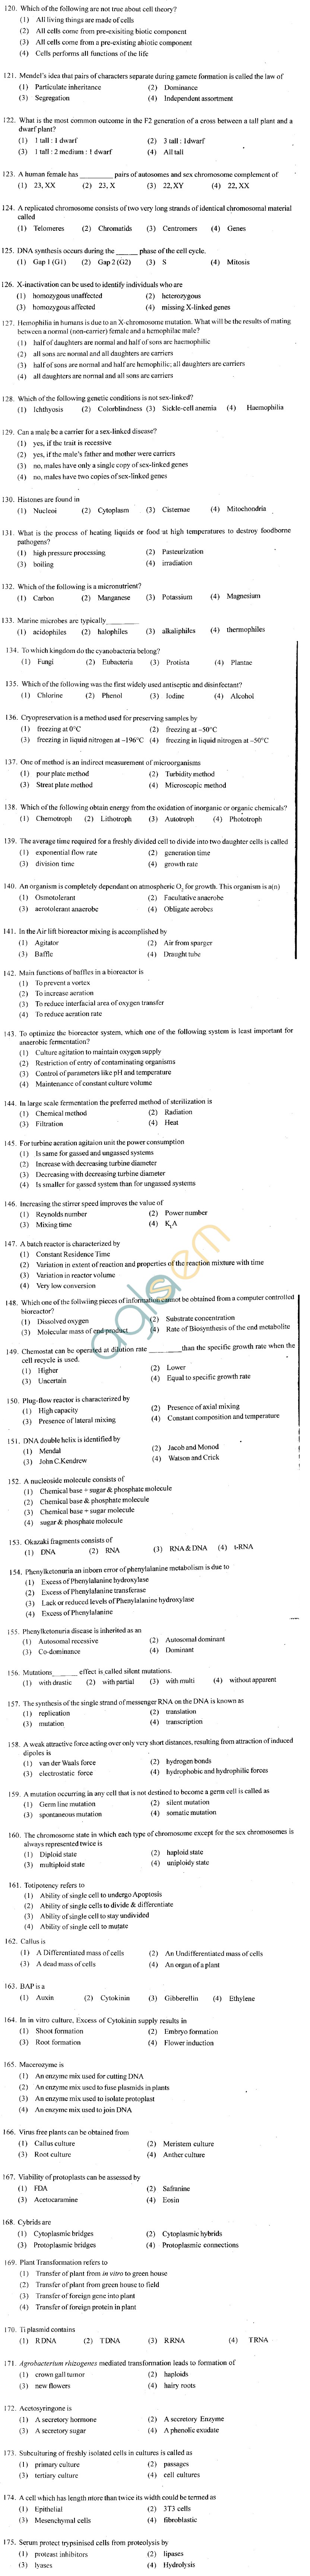 ECET 2012 Question Paper with Answers - Biotechnology